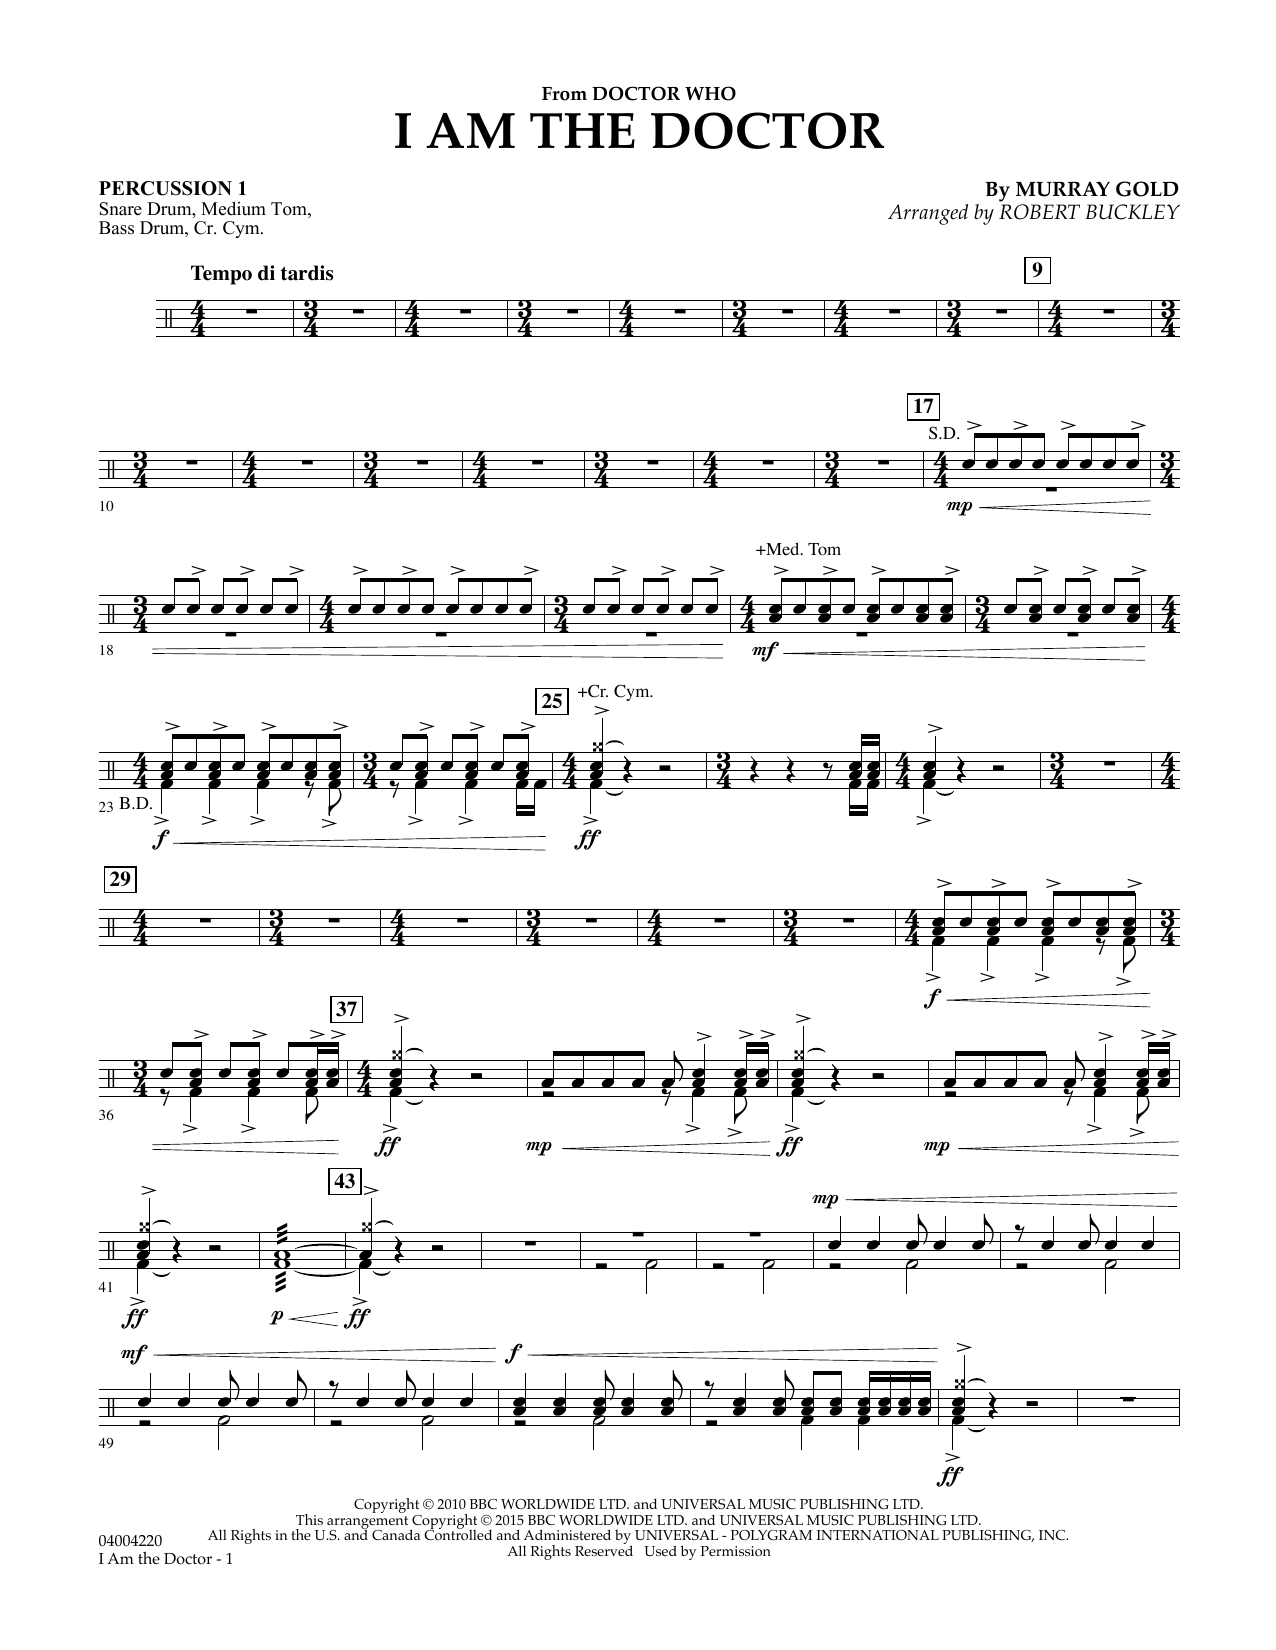 Robert Buckley I Am the Doctor (from Doctor Who) - Percussion 1 sheet music notes and chords. Download Printable PDF.